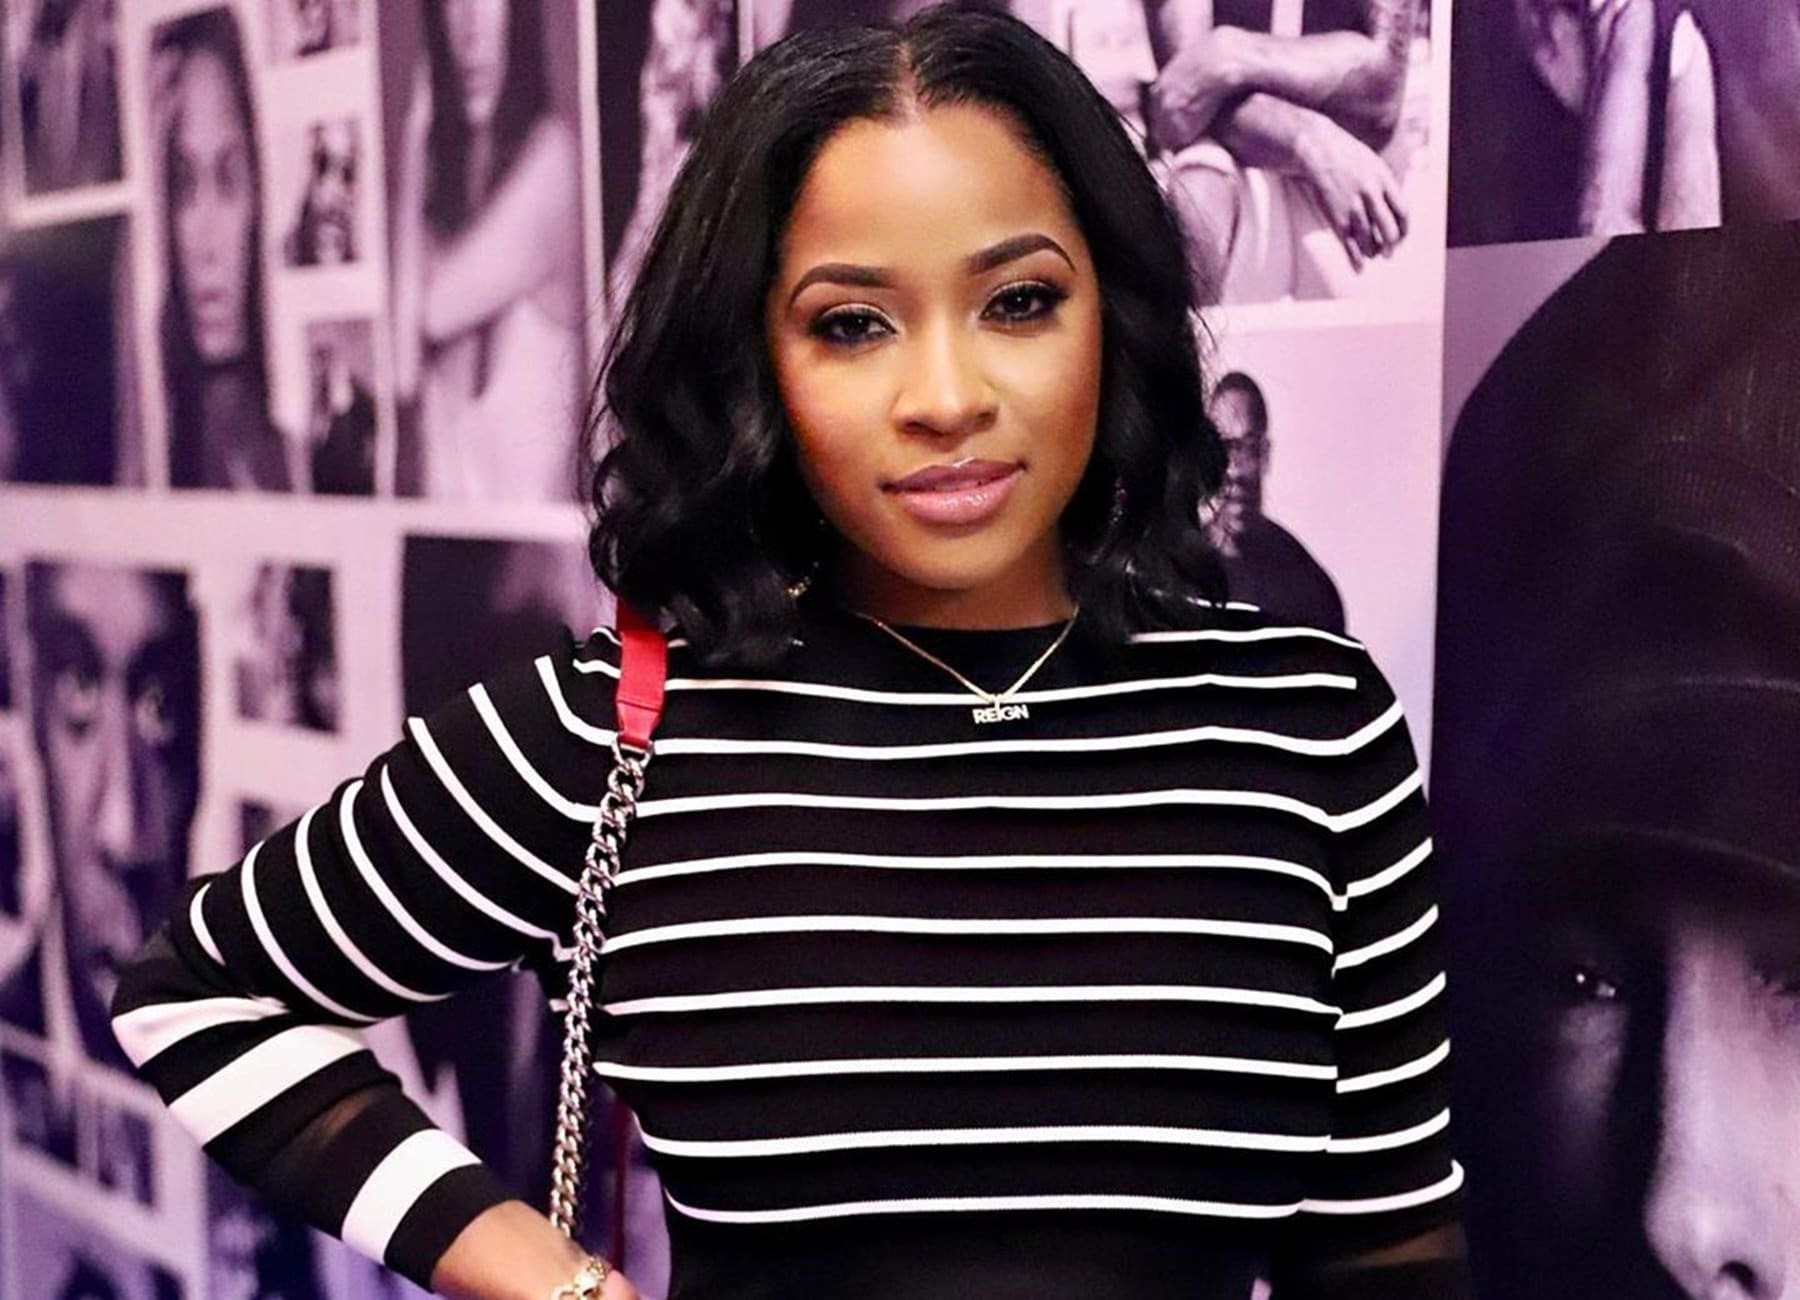 Toya Johnson Is Excited To Try The FabFitFun Goodies - Check Out The Post She Shared